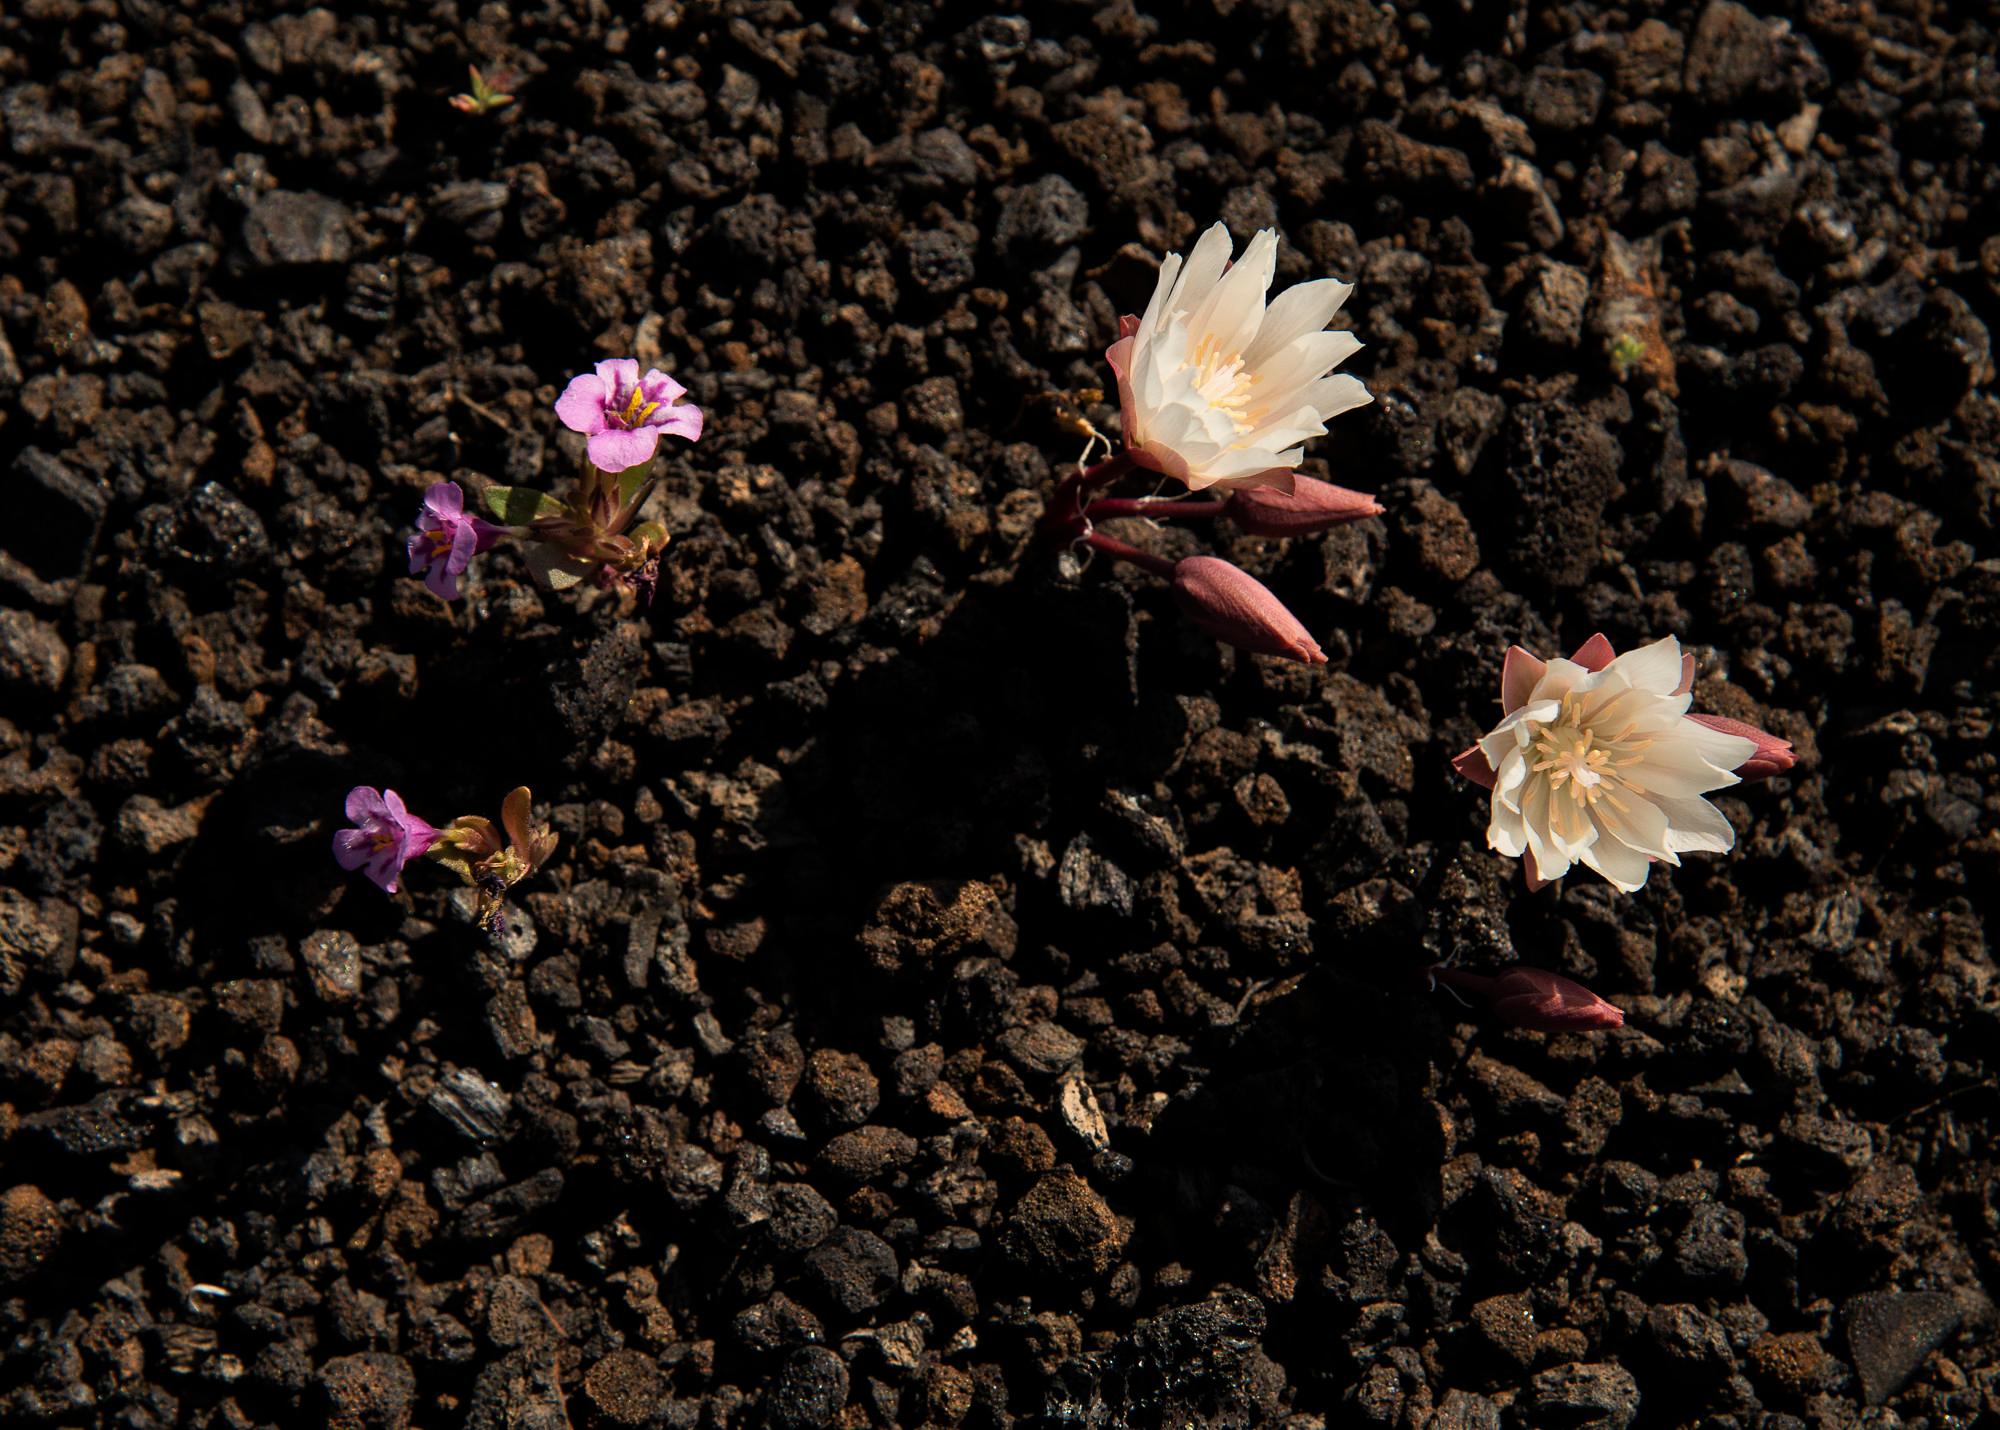 Small purple flowers and larger white flowers with reddish stems grow out of black volcanic rock